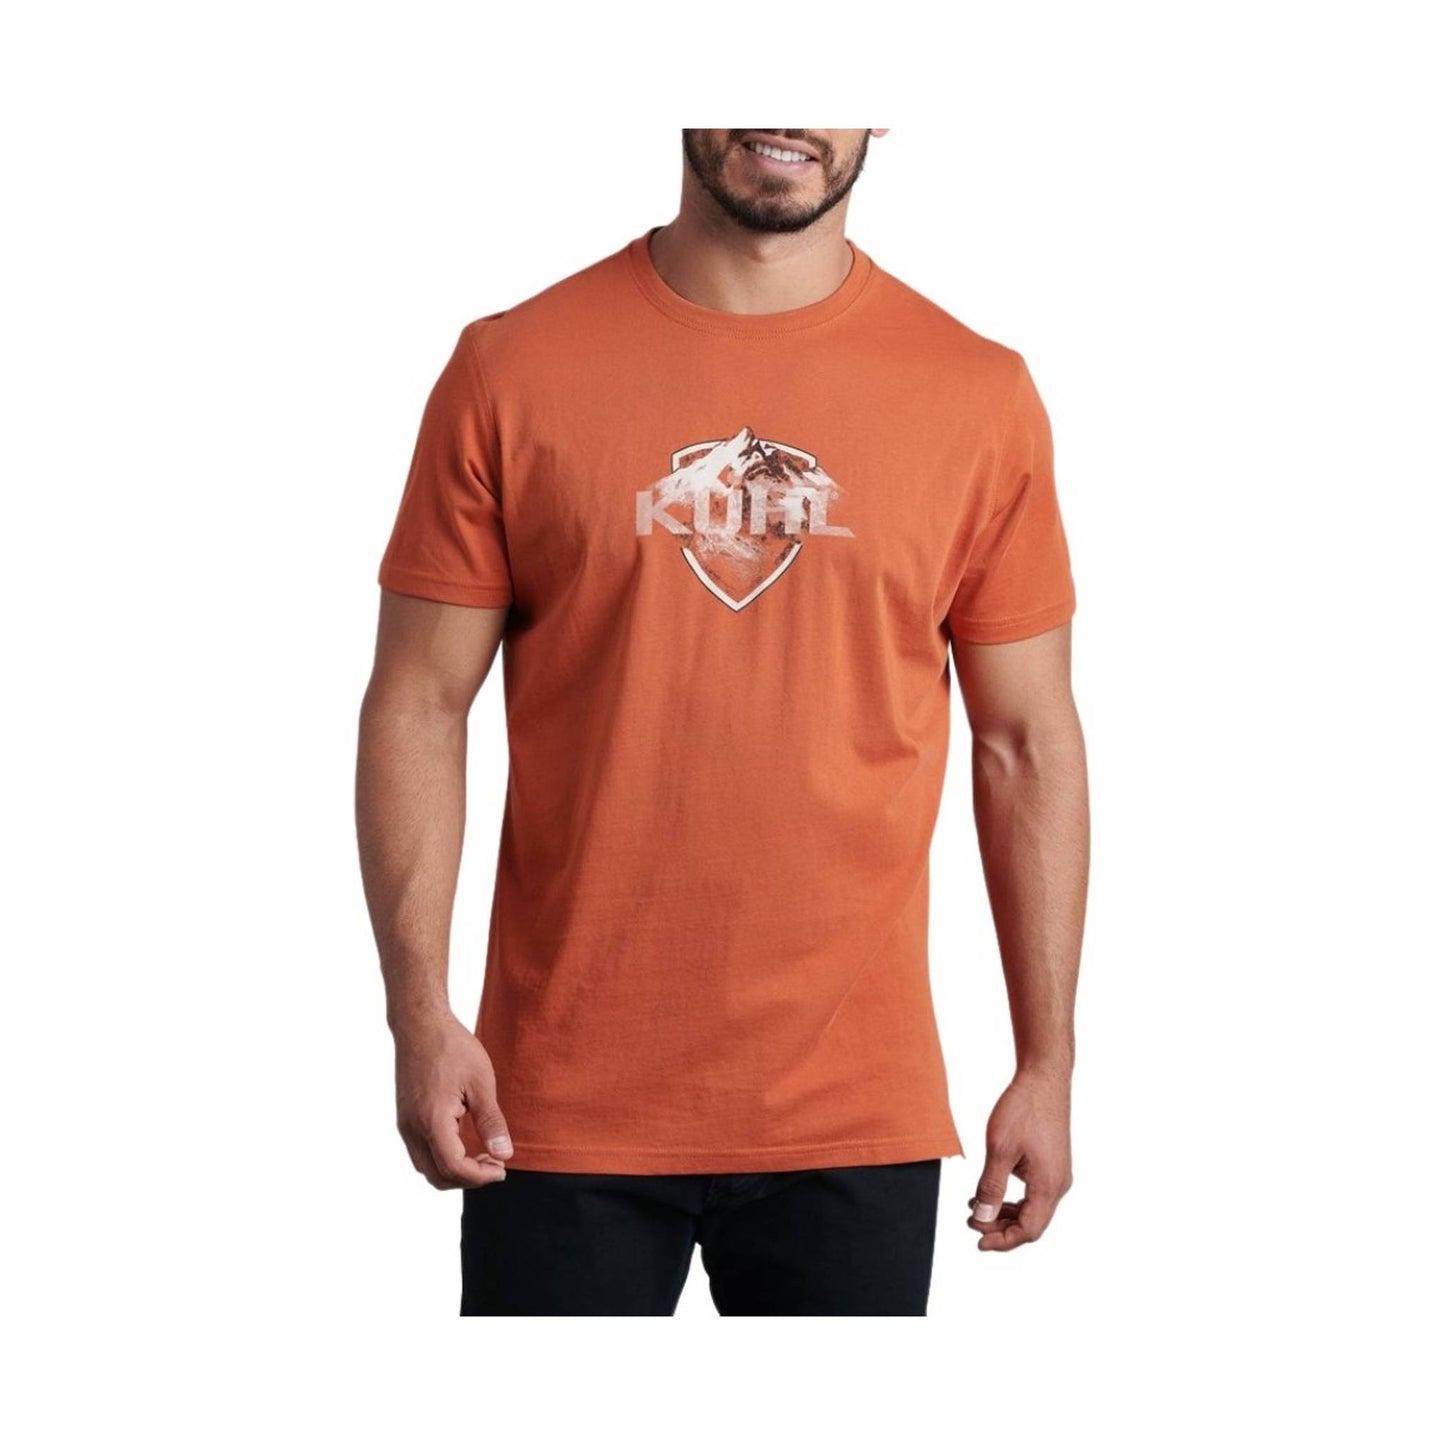 Kuhl Men's Born in the Mountains T-Shirt - Rust